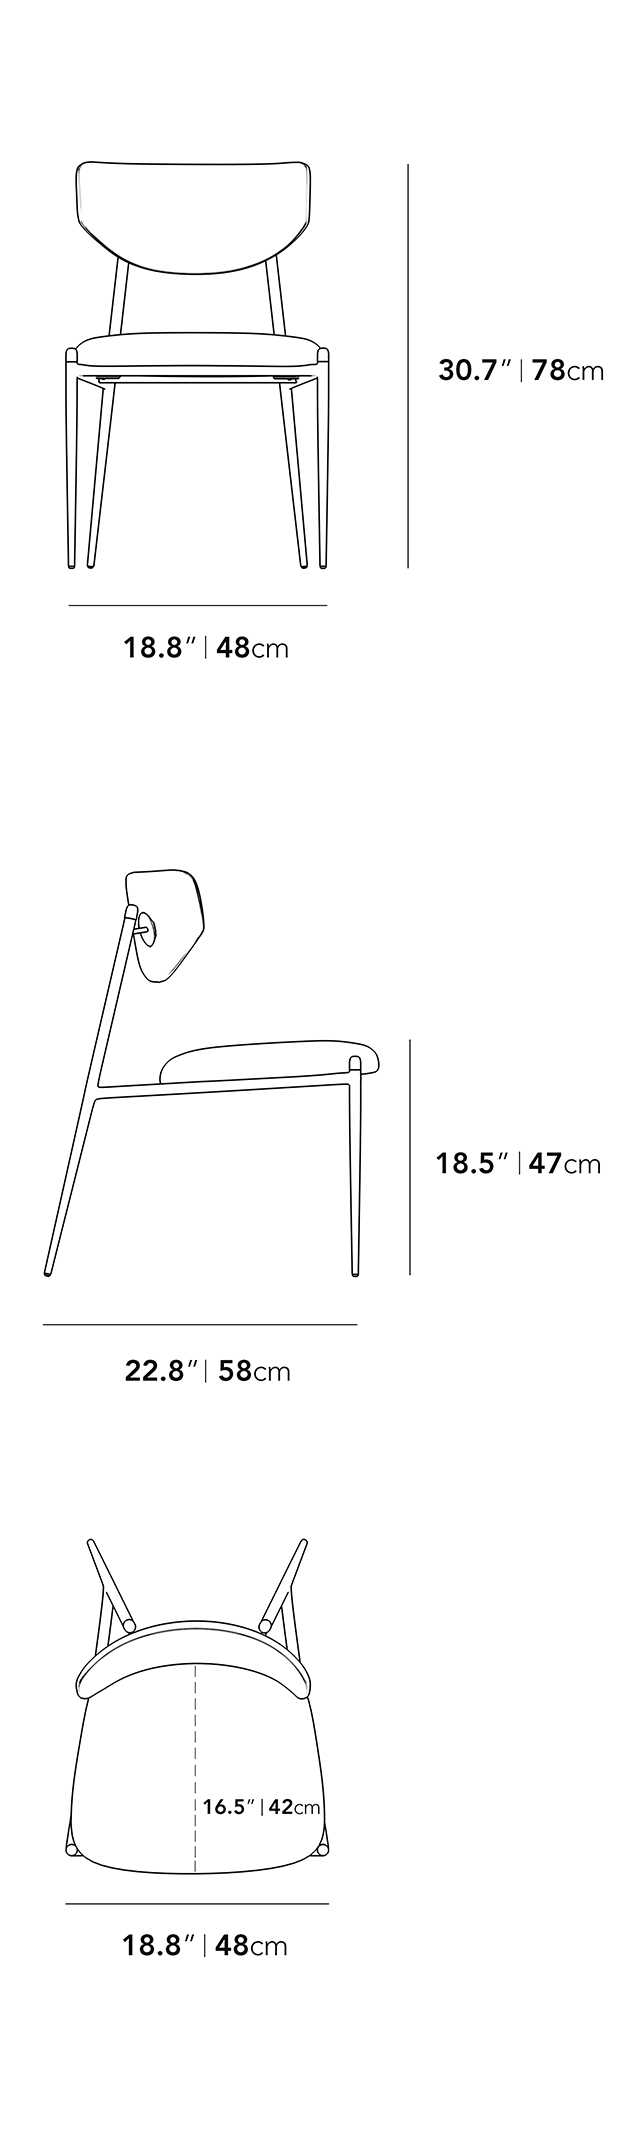 Dimensions for Geno Dining Chair